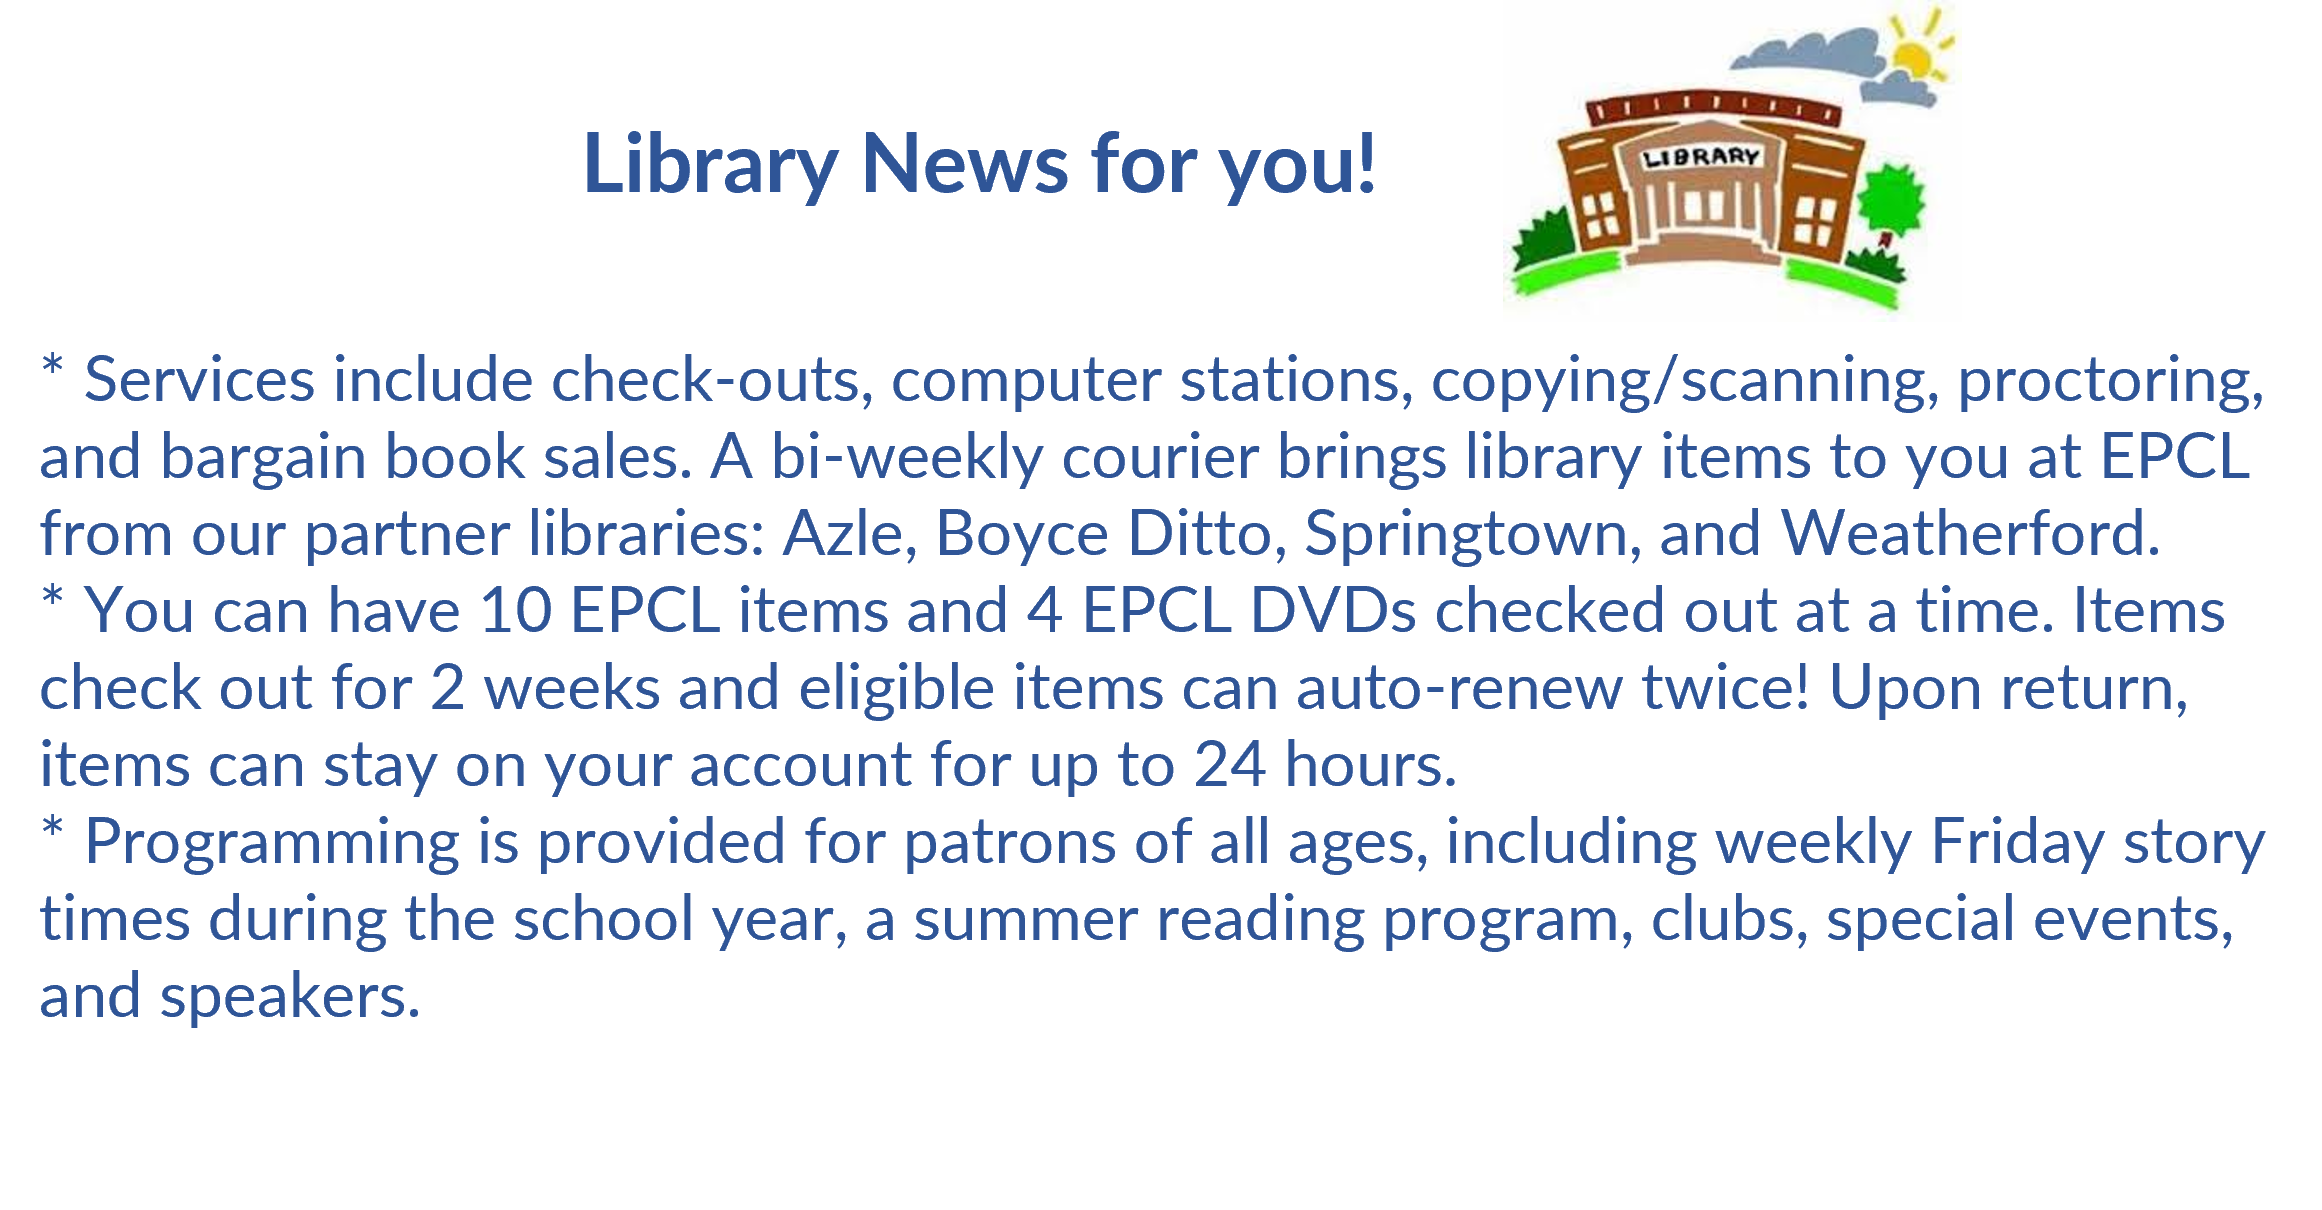 library news for website.png